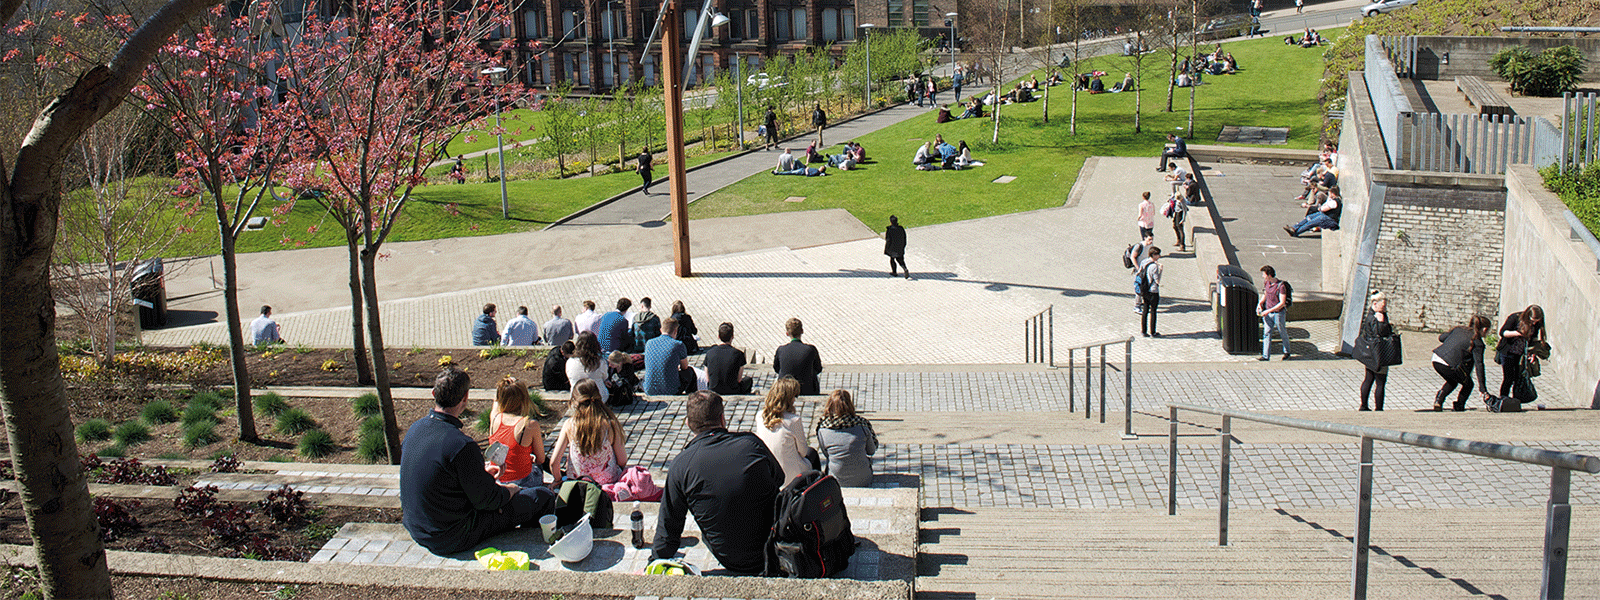 Students on campus, Rottenrow Gardens